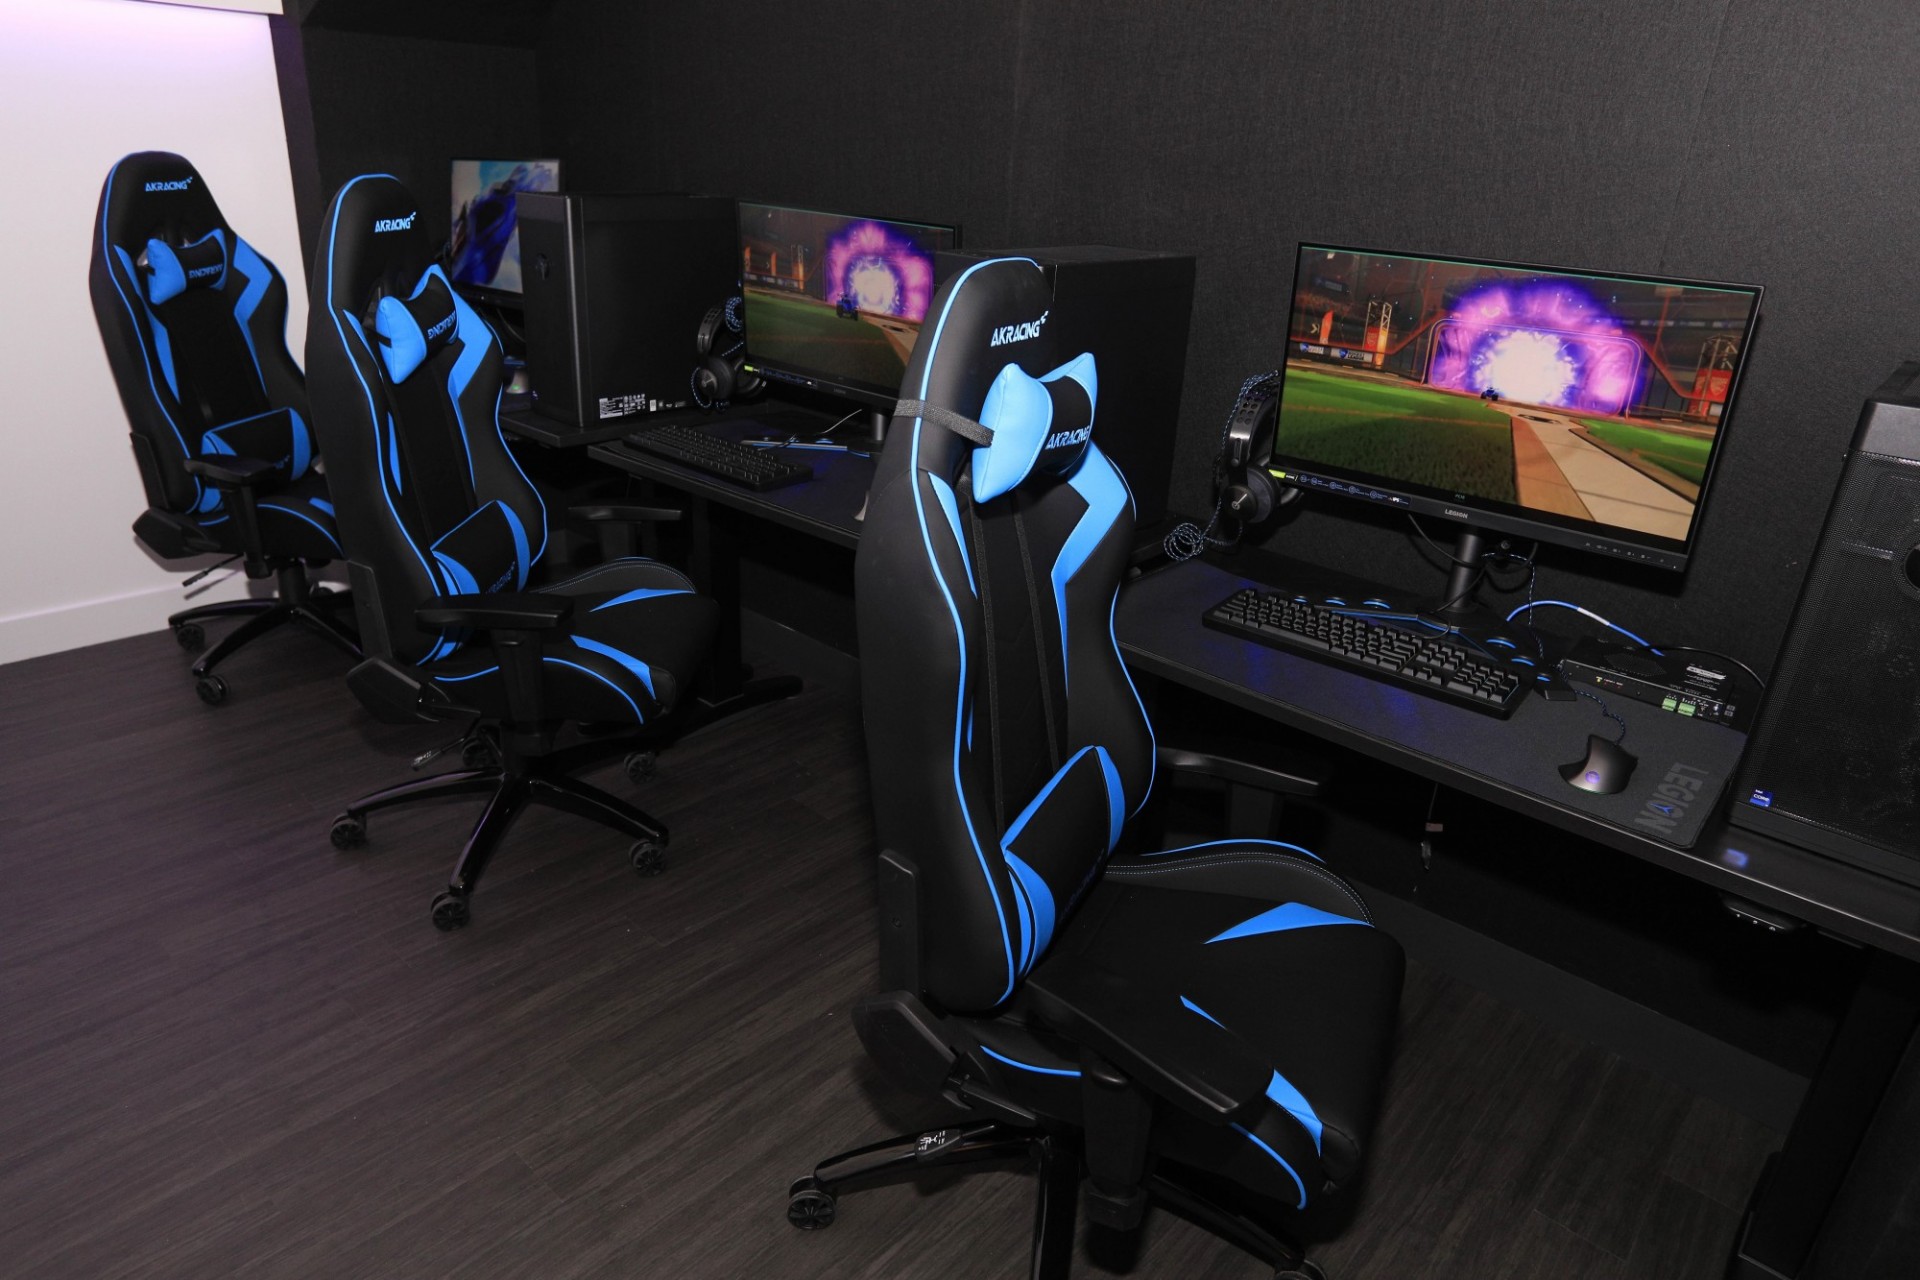 The room features 18 Lenovo Legion T7 gaming PCs. Photo by Michael DiVito